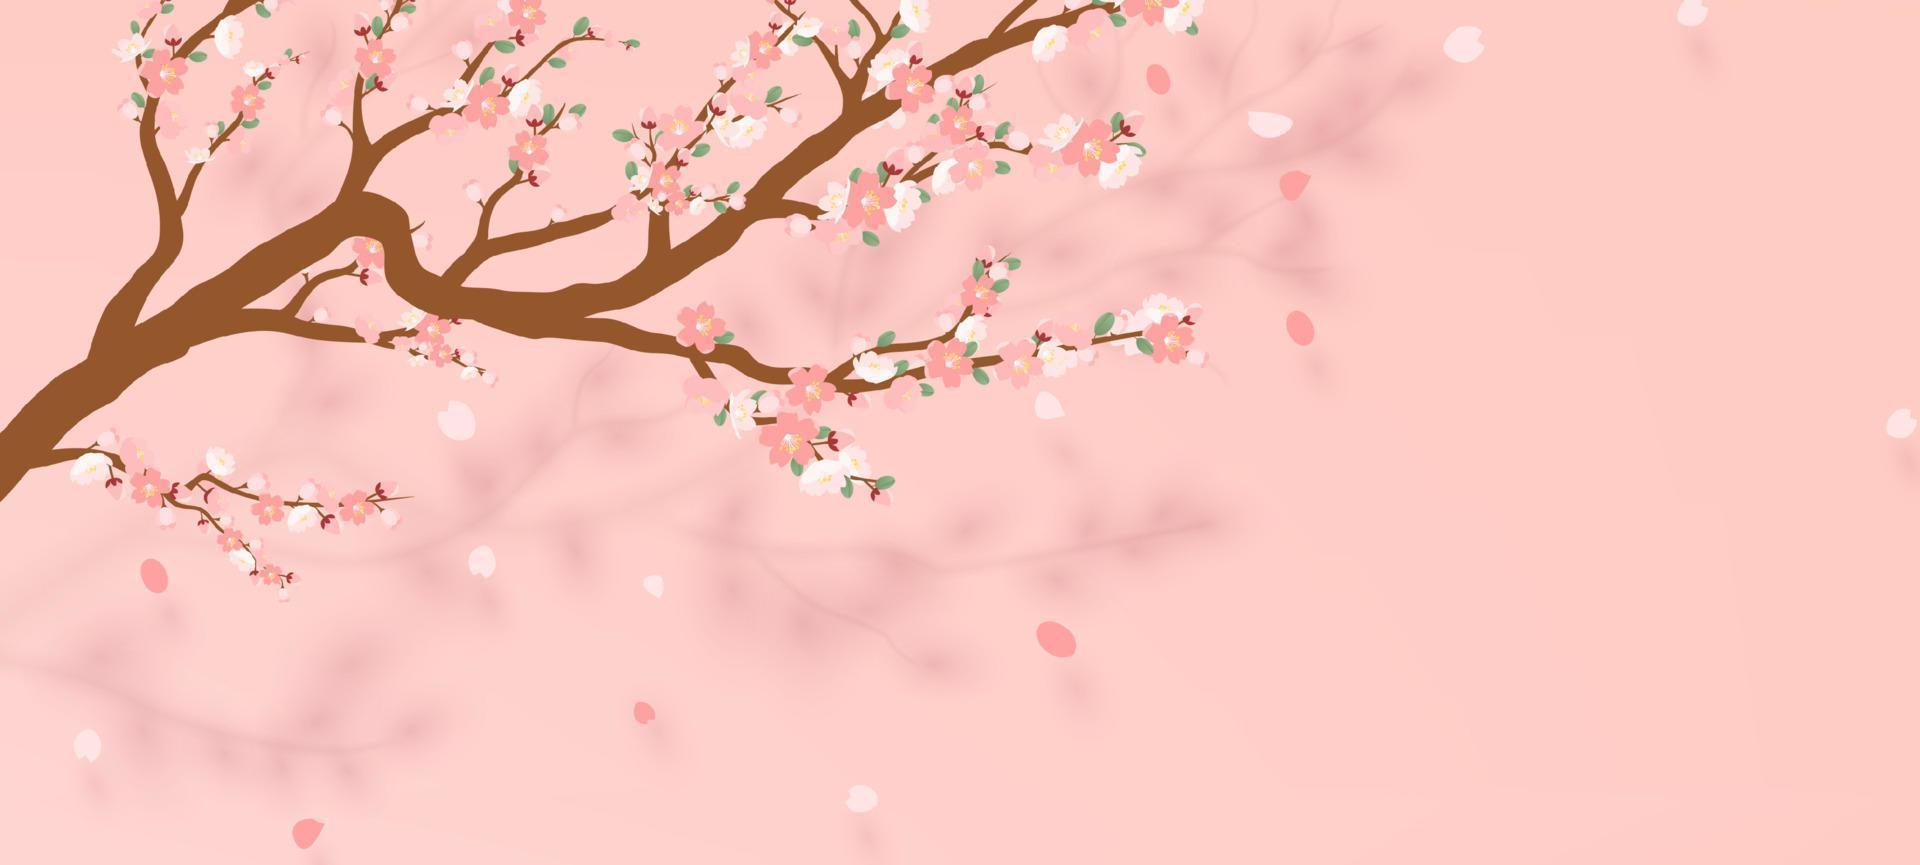 Blossoming branch of sakura - Japanese cherry tree with falling petal. Beautiful cherry blossom pink - violet, isolated on white background. Vector illustration